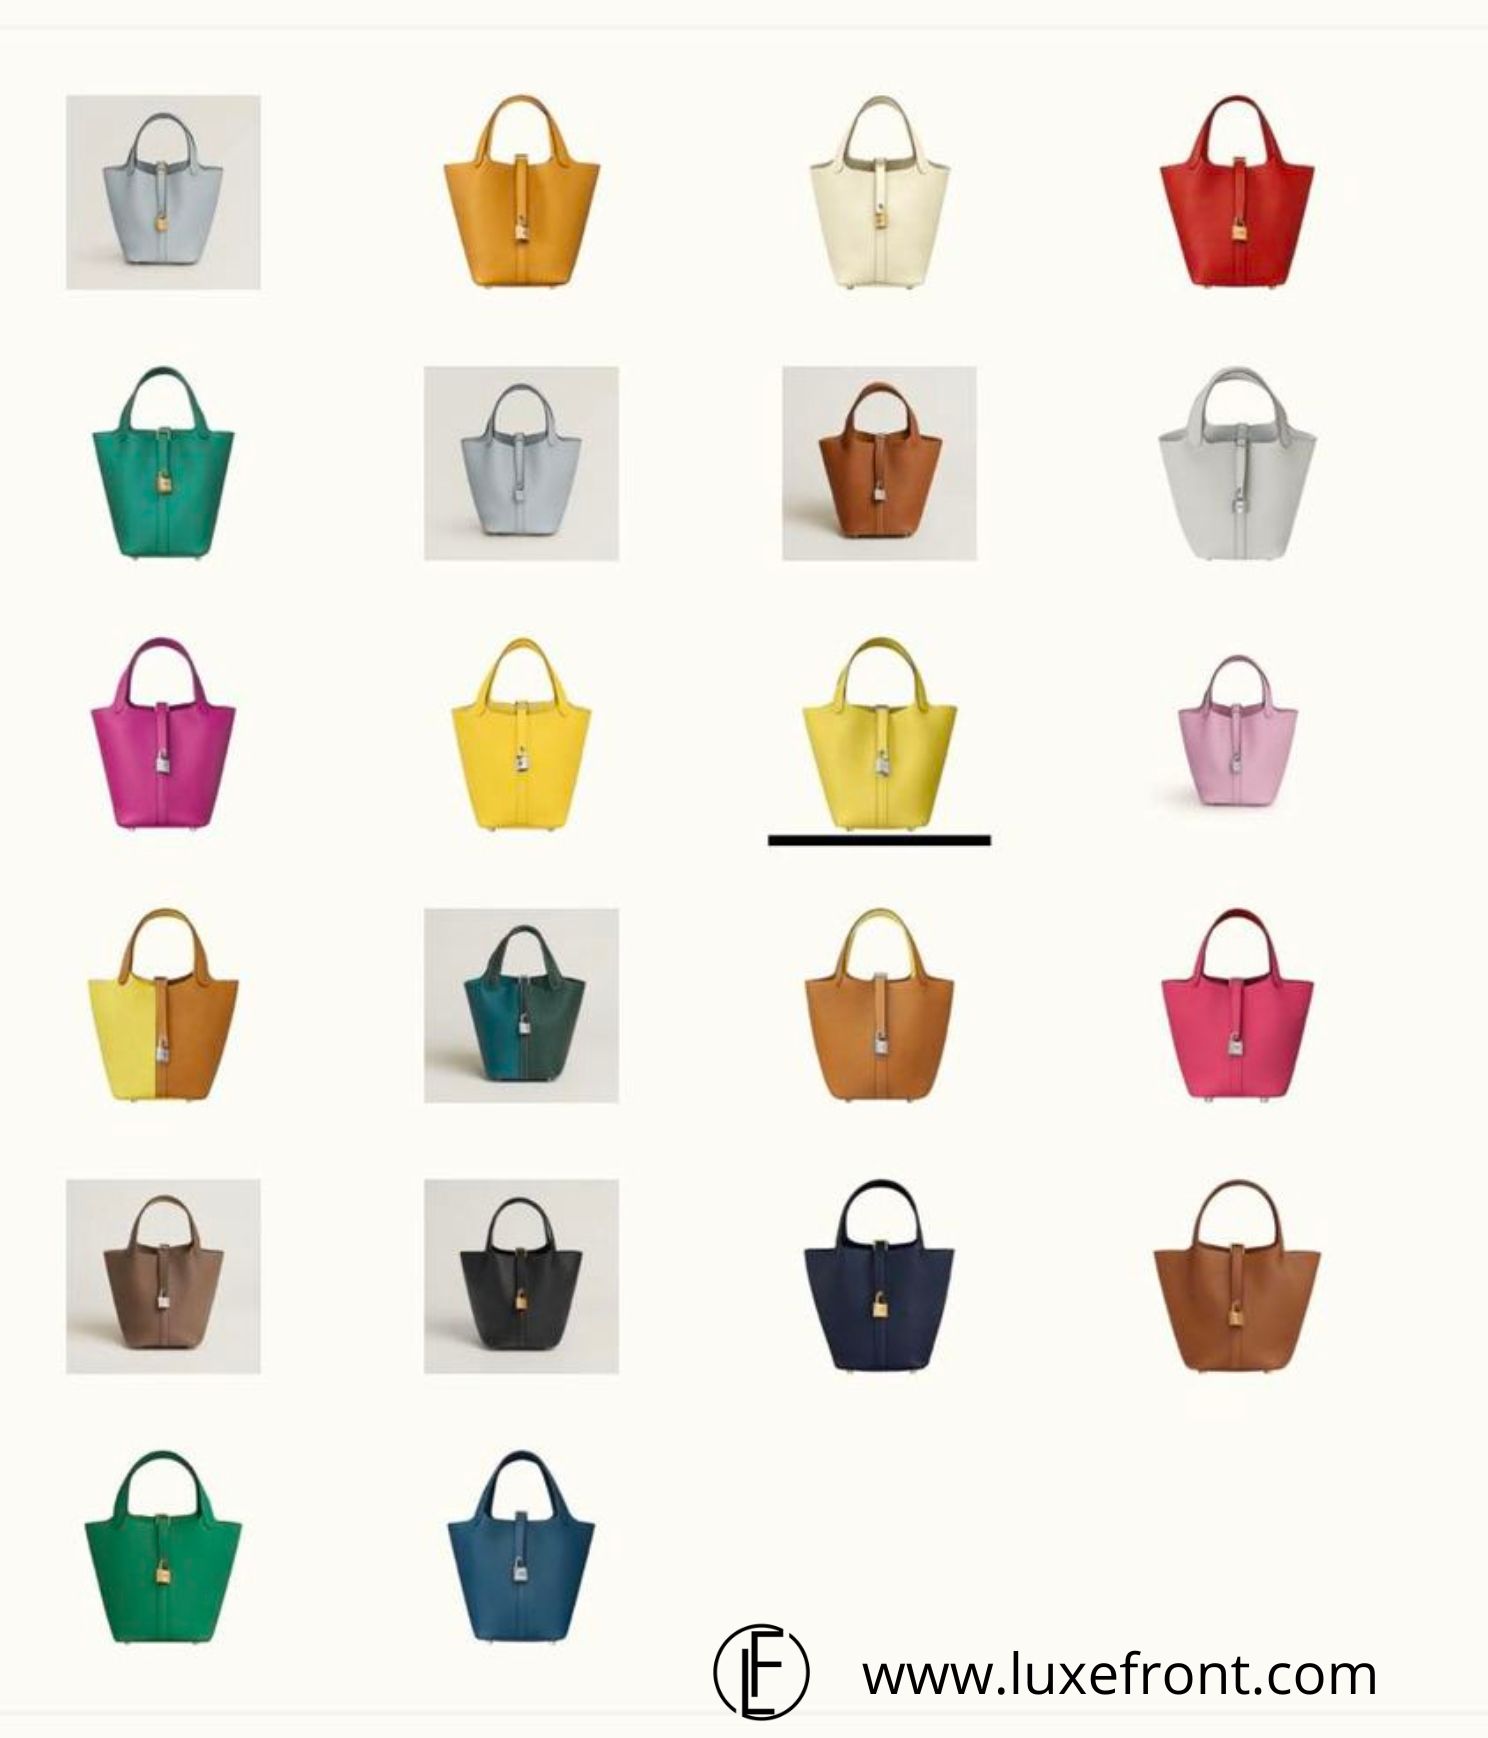 How To Buy A Hermes Bag Directly On Hermes’ Website